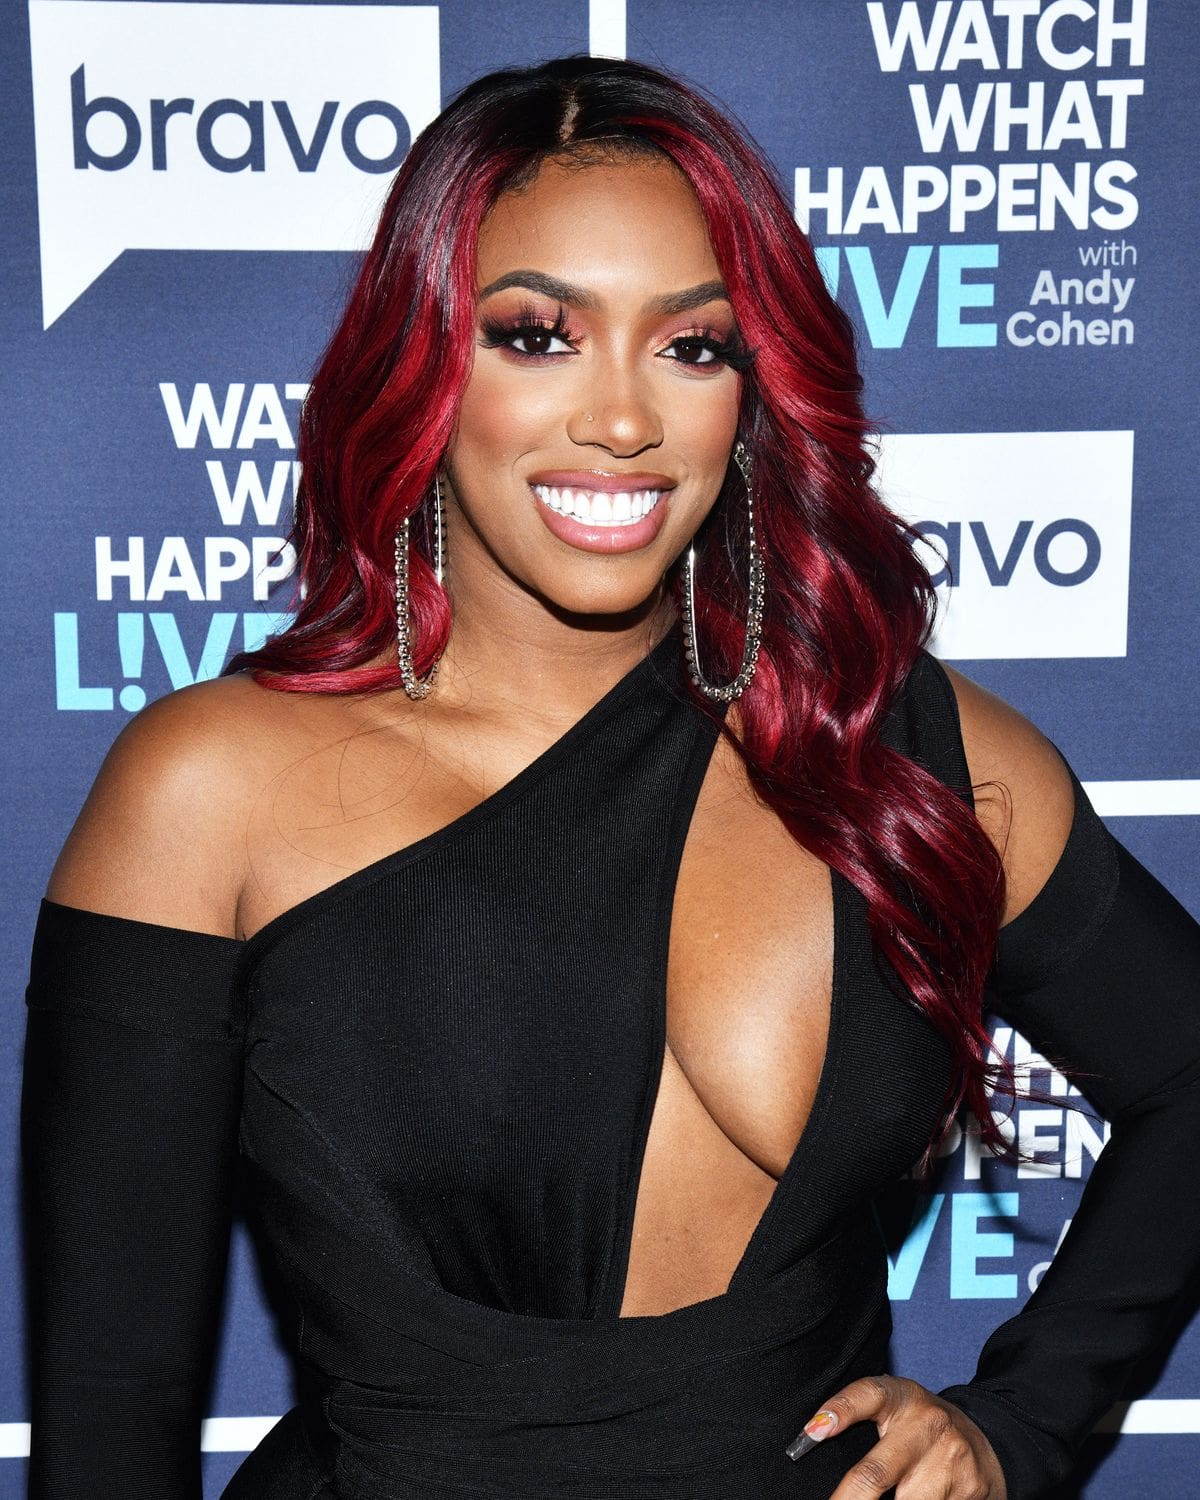 ”porsha-williams-fans-are-praising-her-slimmed-down-figure-after-seeing-this-photo”